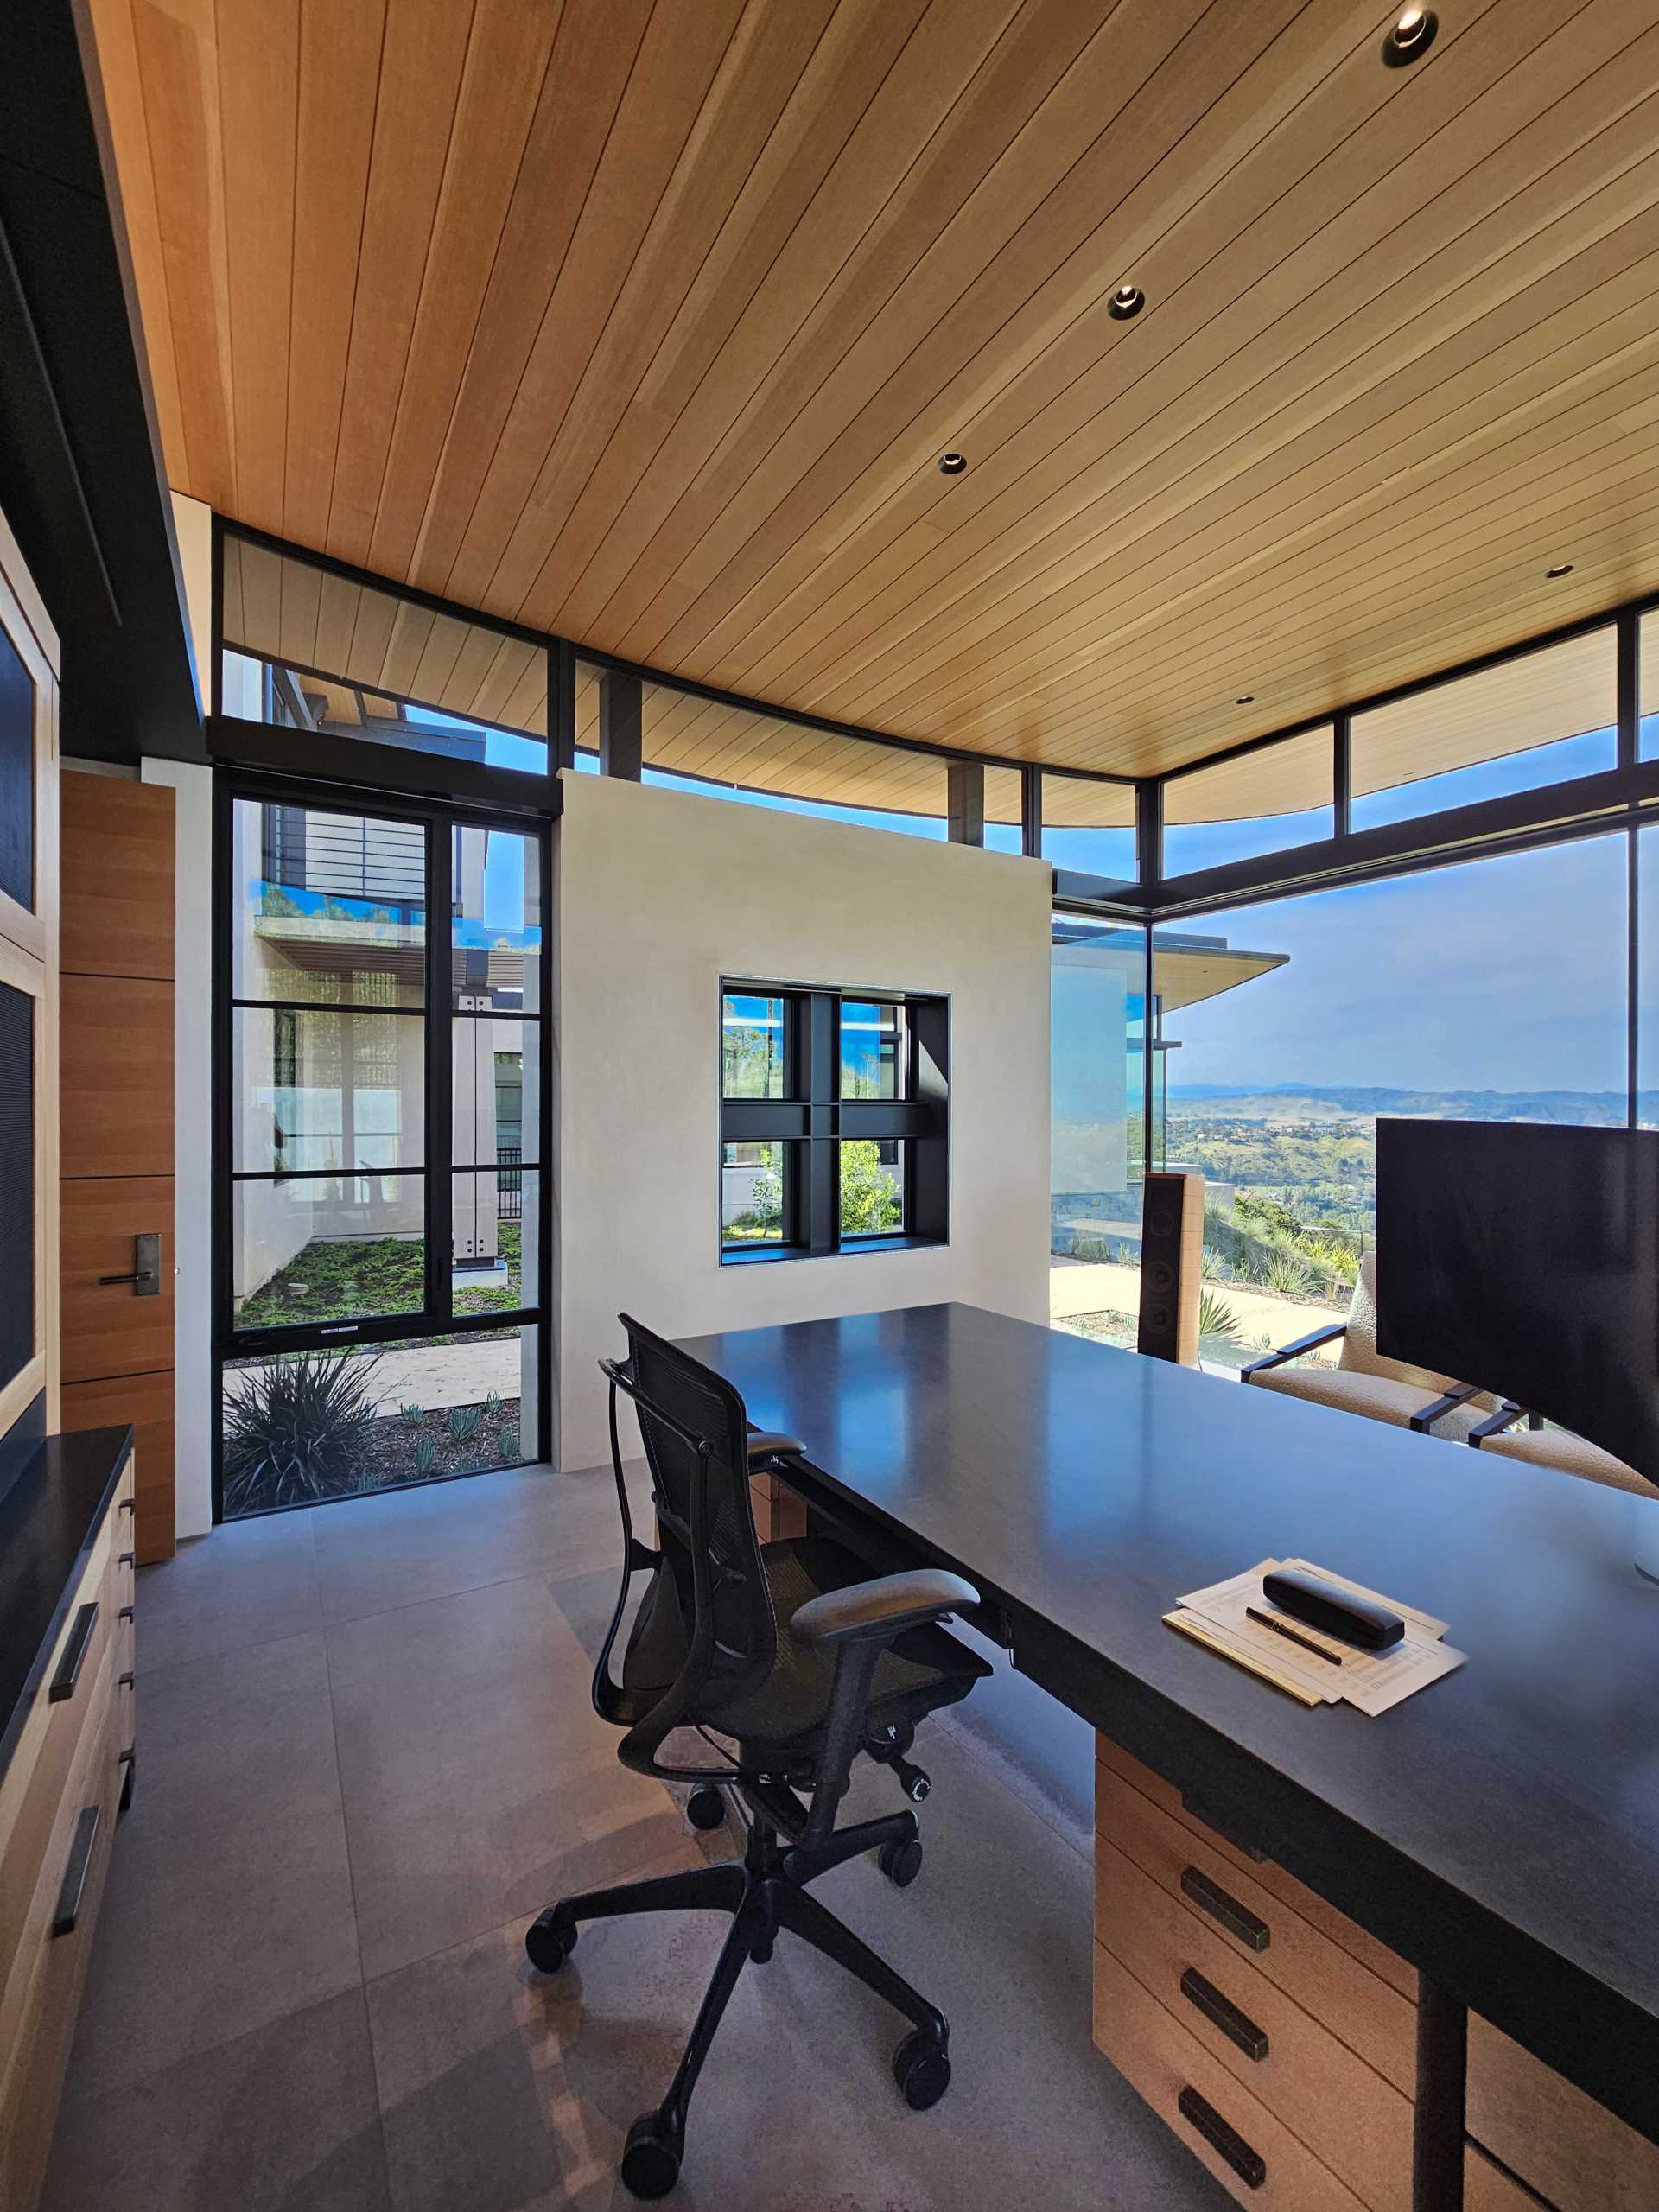 A modern home office with floor-to-ceiling windows provide natural light and expansive views.